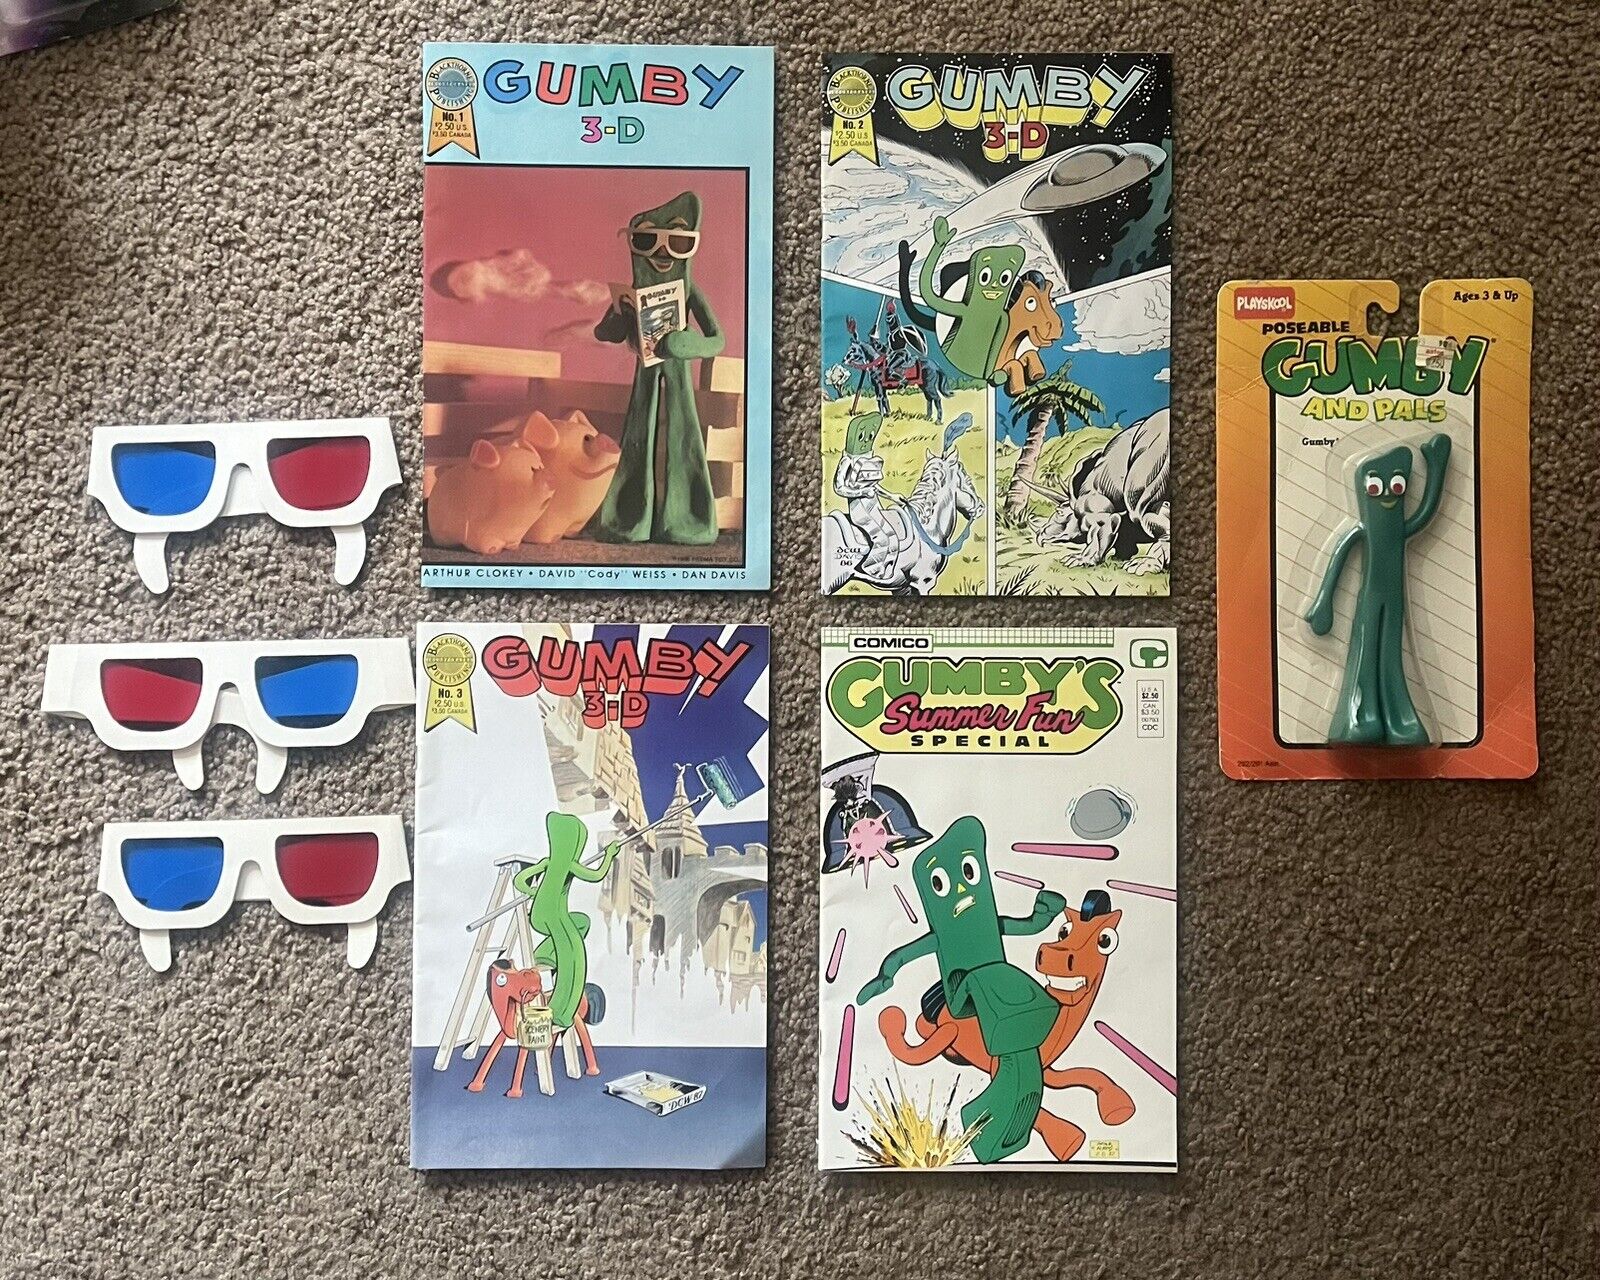 RARE Gumby 3-D Comic #1-3 & SUMMER with 3 pairs glasses & Posable GUMBY 1986-88